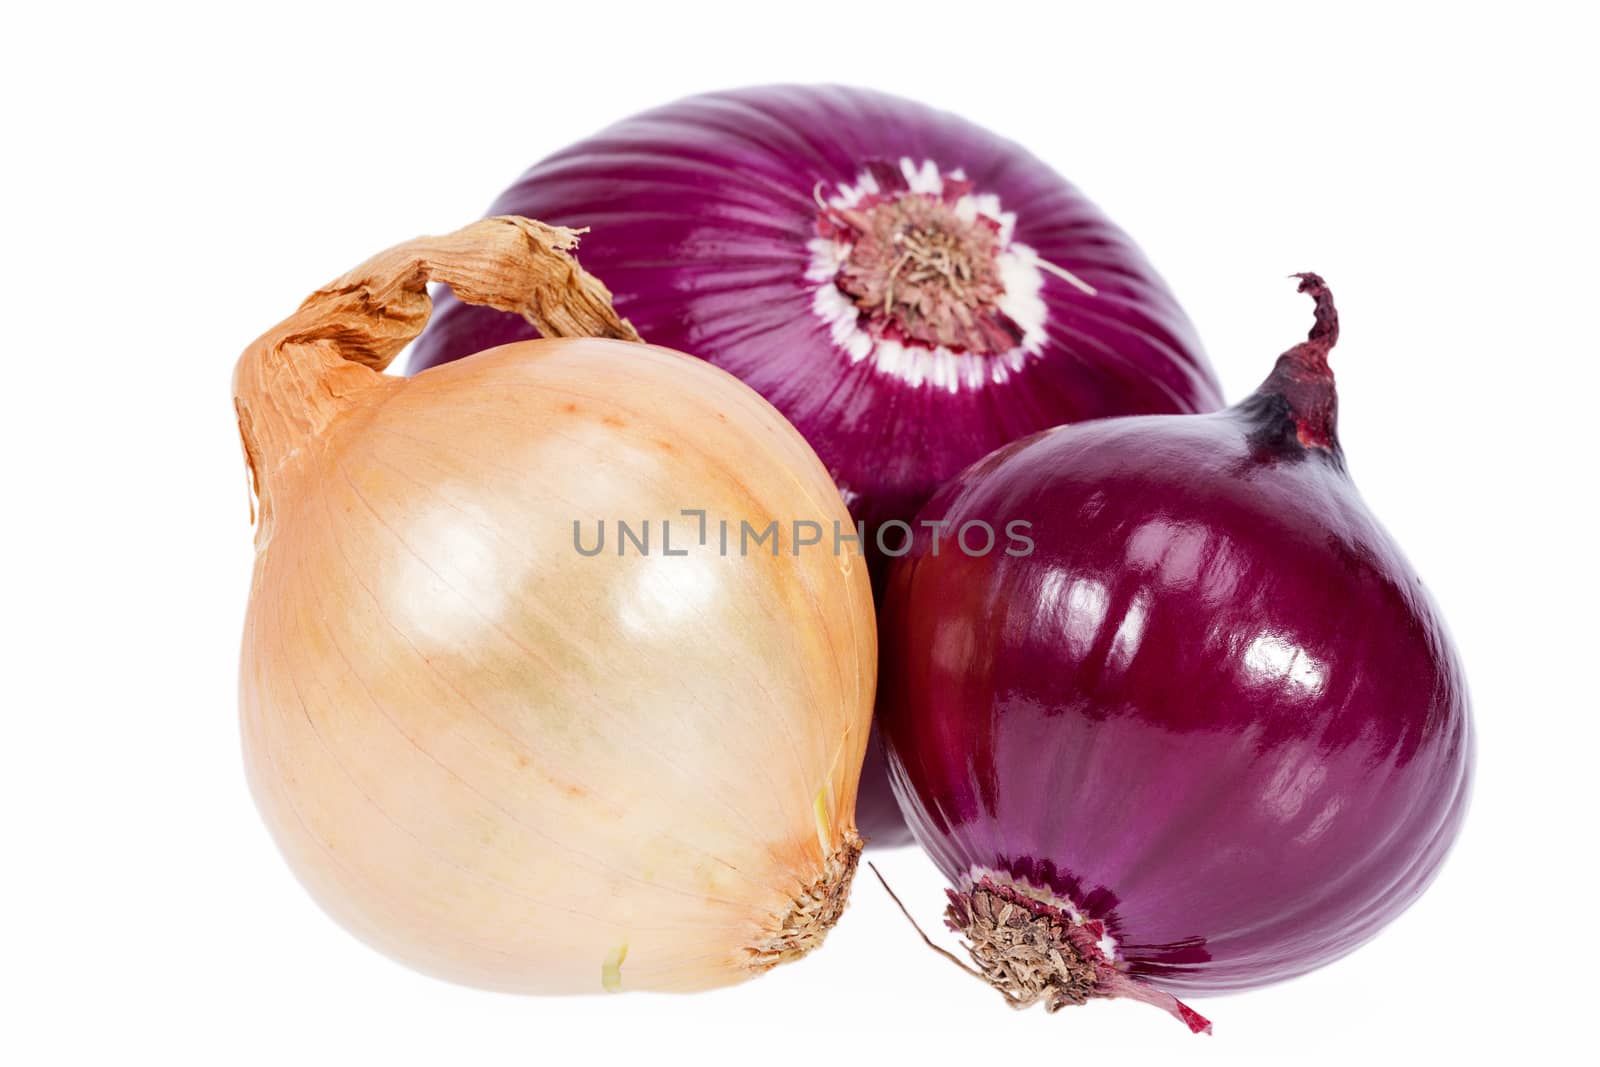 Group of red and yellow onions  on white background  by mychadre77